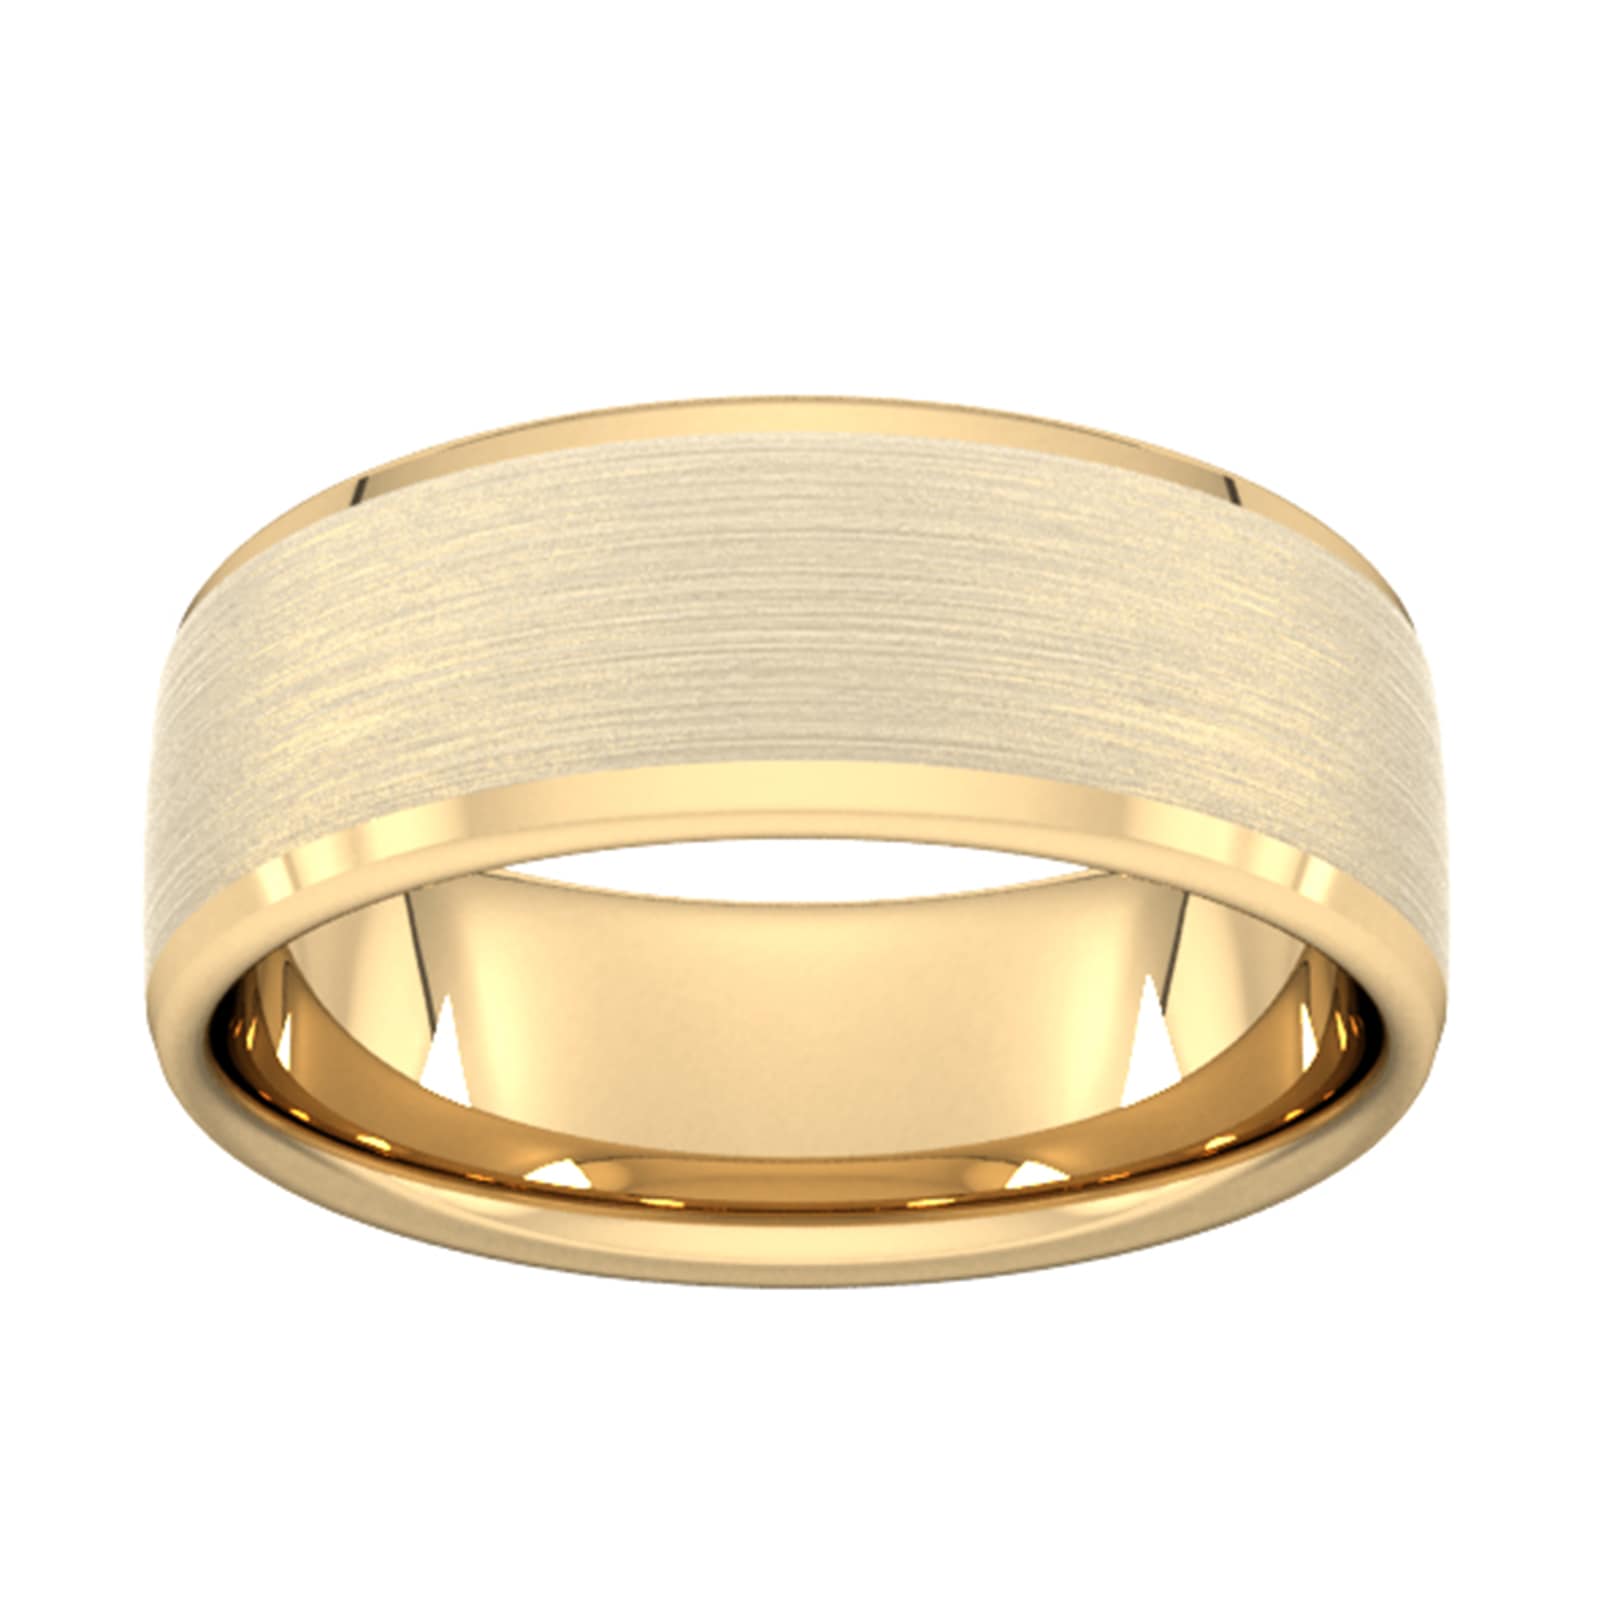 8mm Slight Court Standard Polished Chamfered Edges With Matt Centre Wedding Ring In 18 Carat Yellow Gold - Ring Size L